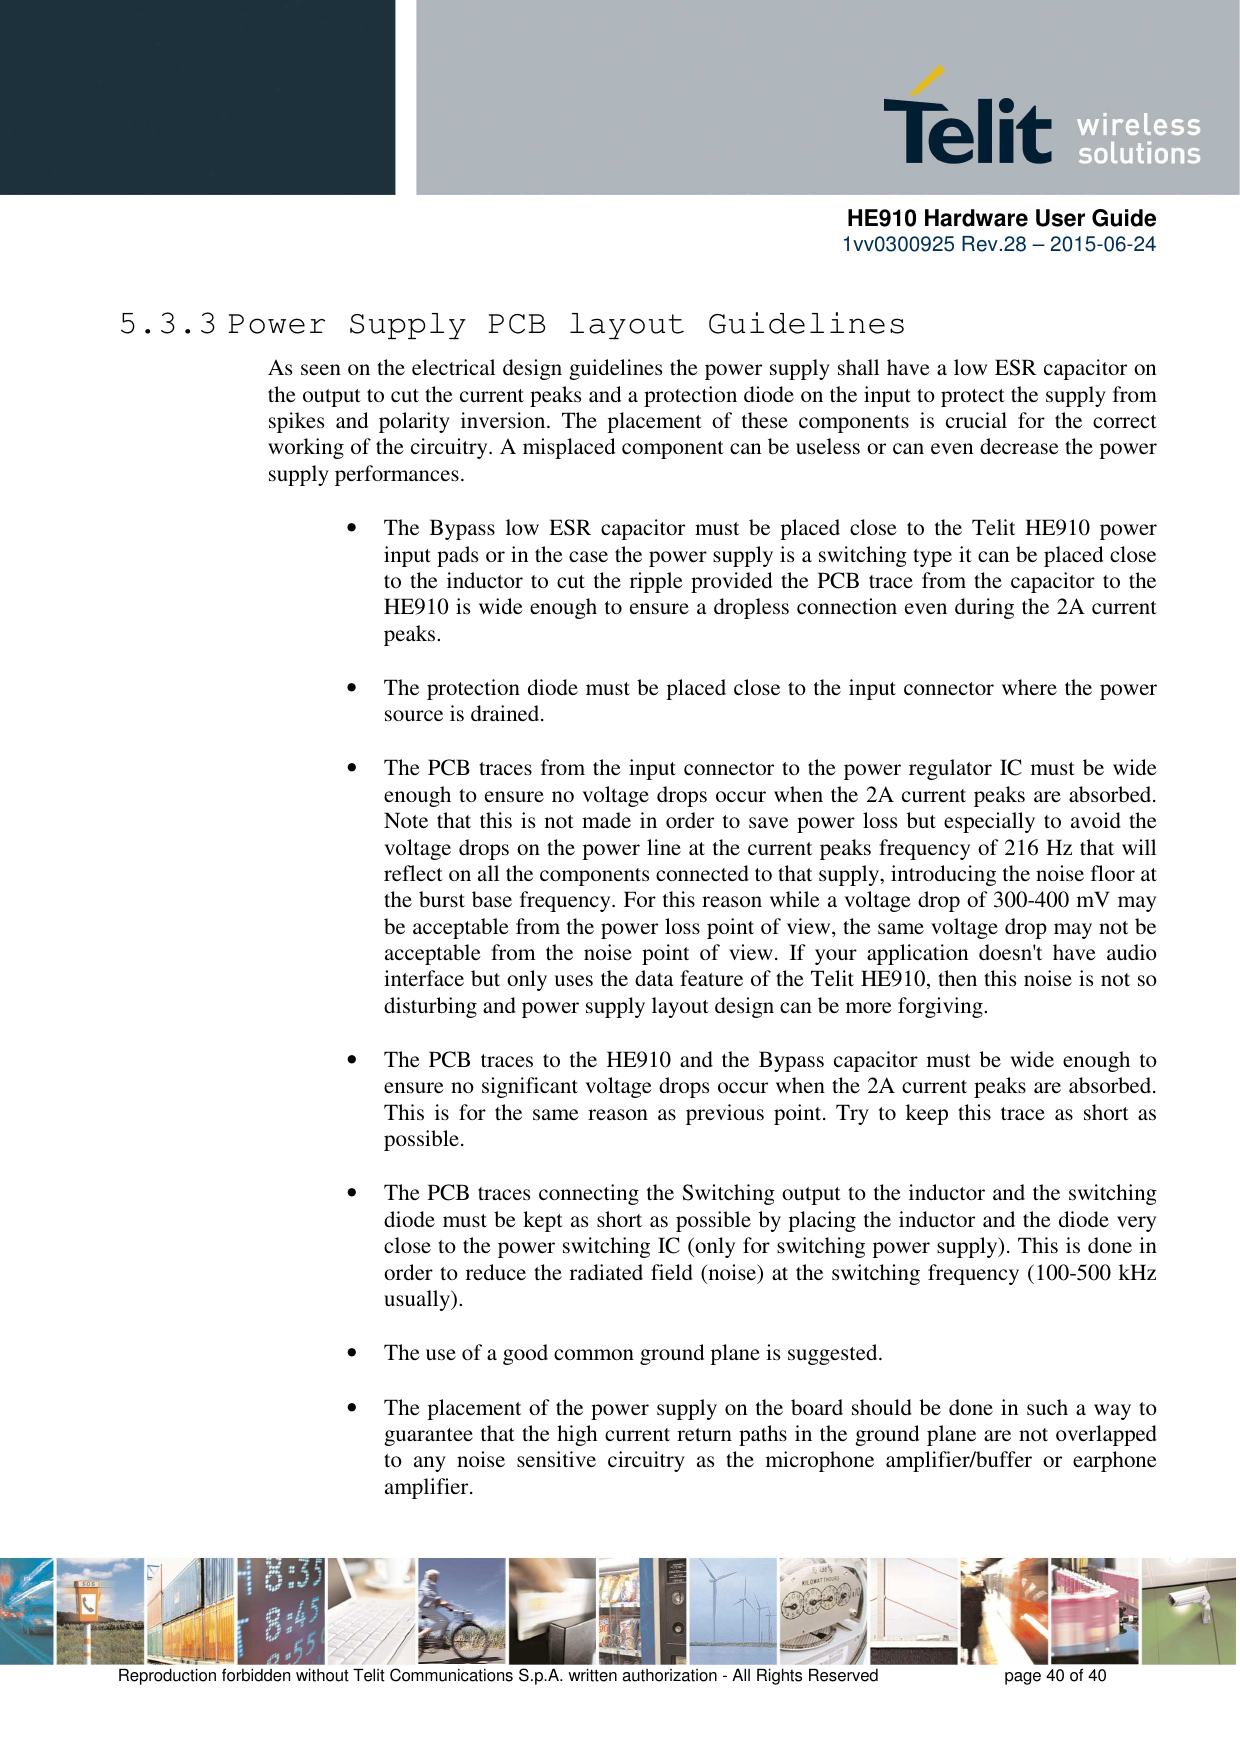      HE910 Hardware User Guide 1vv0300925 Rev.28 – 2015-06-24    Reproduction forbidden without Telit Communications S.p.A. written authorization - All Rights Reserved    page 40 of 40  5.3.3 Power Supply PCB layout Guidelines As seen on the electrical design guidelines the power supply shall have a low ESR capacitor on the output to cut the current peaks and a protection diode on the input to protect the supply from spikes  and  polarity  inversion.  The  placement  of  these  components  is  crucial  for  the  correct working of the circuitry. A misplaced component can be useless or can even decrease the power supply performances.  • The  Bypass  low  ESR  capacitor  must  be  placed  close  to  the  Telit  HE910  power input pads or in the case the power supply is a switching type it can be placed close to the inductor to cut the ripple provided the PCB trace from the capacitor to the HE910 is wide enough to ensure a dropless connection even during the 2A current peaks.  • The protection diode must be placed close to the input connector where the power source is drained.  • The PCB traces from the input connector to the power regulator IC must be wide enough to ensure no voltage drops occur when the 2A current peaks are absorbed. Note that this is not made in order to save power loss but especially to avoid the voltage drops on the power line at the current peaks frequency of 216 Hz that will reflect on all the components connected to that supply, introducing the noise floor at the burst base frequency. For this reason while a voltage drop of 300-400 mV may be acceptable from the power loss point of view, the same voltage drop may not be acceptable  from  the  noise  point  of  view.  If  your  application  doesn&apos;t  have  audio interface but only uses the data feature of the Telit HE910, then this noise is not so disturbing and power supply layout design can be more forgiving.  • The PCB traces to the HE910 and the Bypass capacitor must be wide enough to ensure no significant voltage drops occur when the 2A current peaks are absorbed. This  is  for  the  same reason as  previous point. Try to  keep this  trace  as  short as possible.  • The PCB traces connecting the Switching output to the inductor and the switching diode must be kept as short as possible by placing the inductor and the diode very close to the power switching IC (only for switching power supply). This is done in order to reduce the radiated field (noise) at the switching frequency (100-500 kHz usually).  • The use of a good common ground plane is suggested.  • The placement of the power supply on the board should be done in such a way to guarantee that the high current return paths in the ground plane are not overlapped to  any  noise  sensitive  circuitry  as  the  microphone  amplifier/buffer  or  earphone amplifier. 